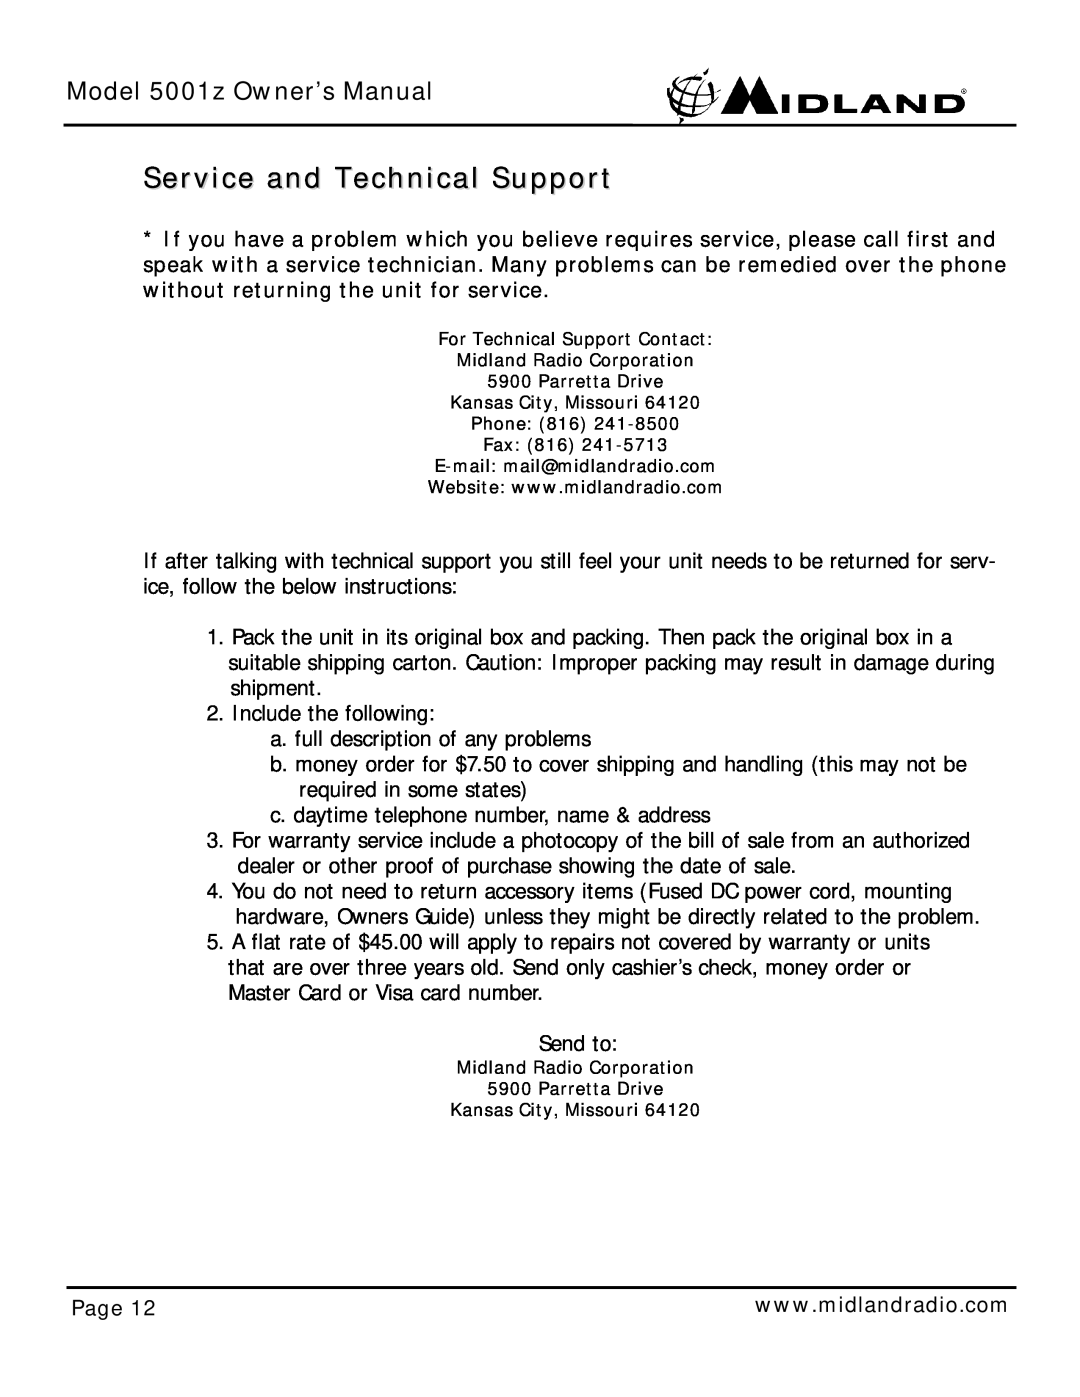 Midland Radio 5001z owner manual Service and Technical Support, Page 